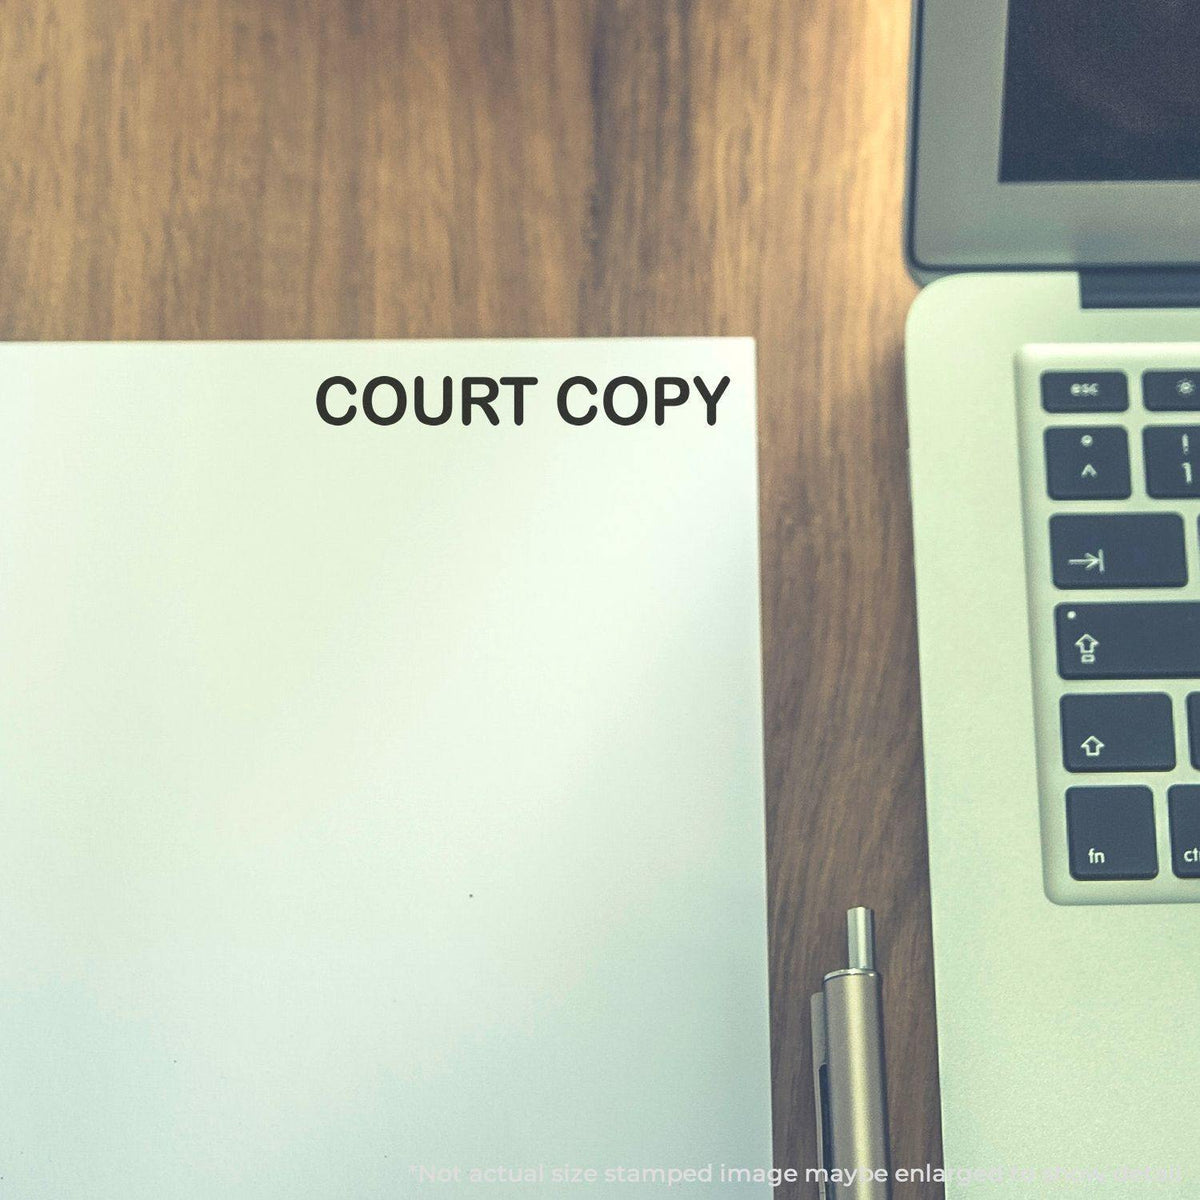 In Use Court Copy Rubber Stamp Image